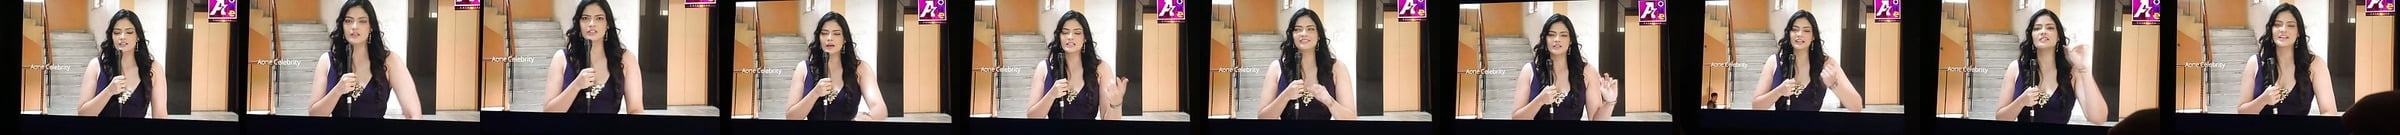 Featured Indian Morning Sex Porn Videos Xhamster 8183